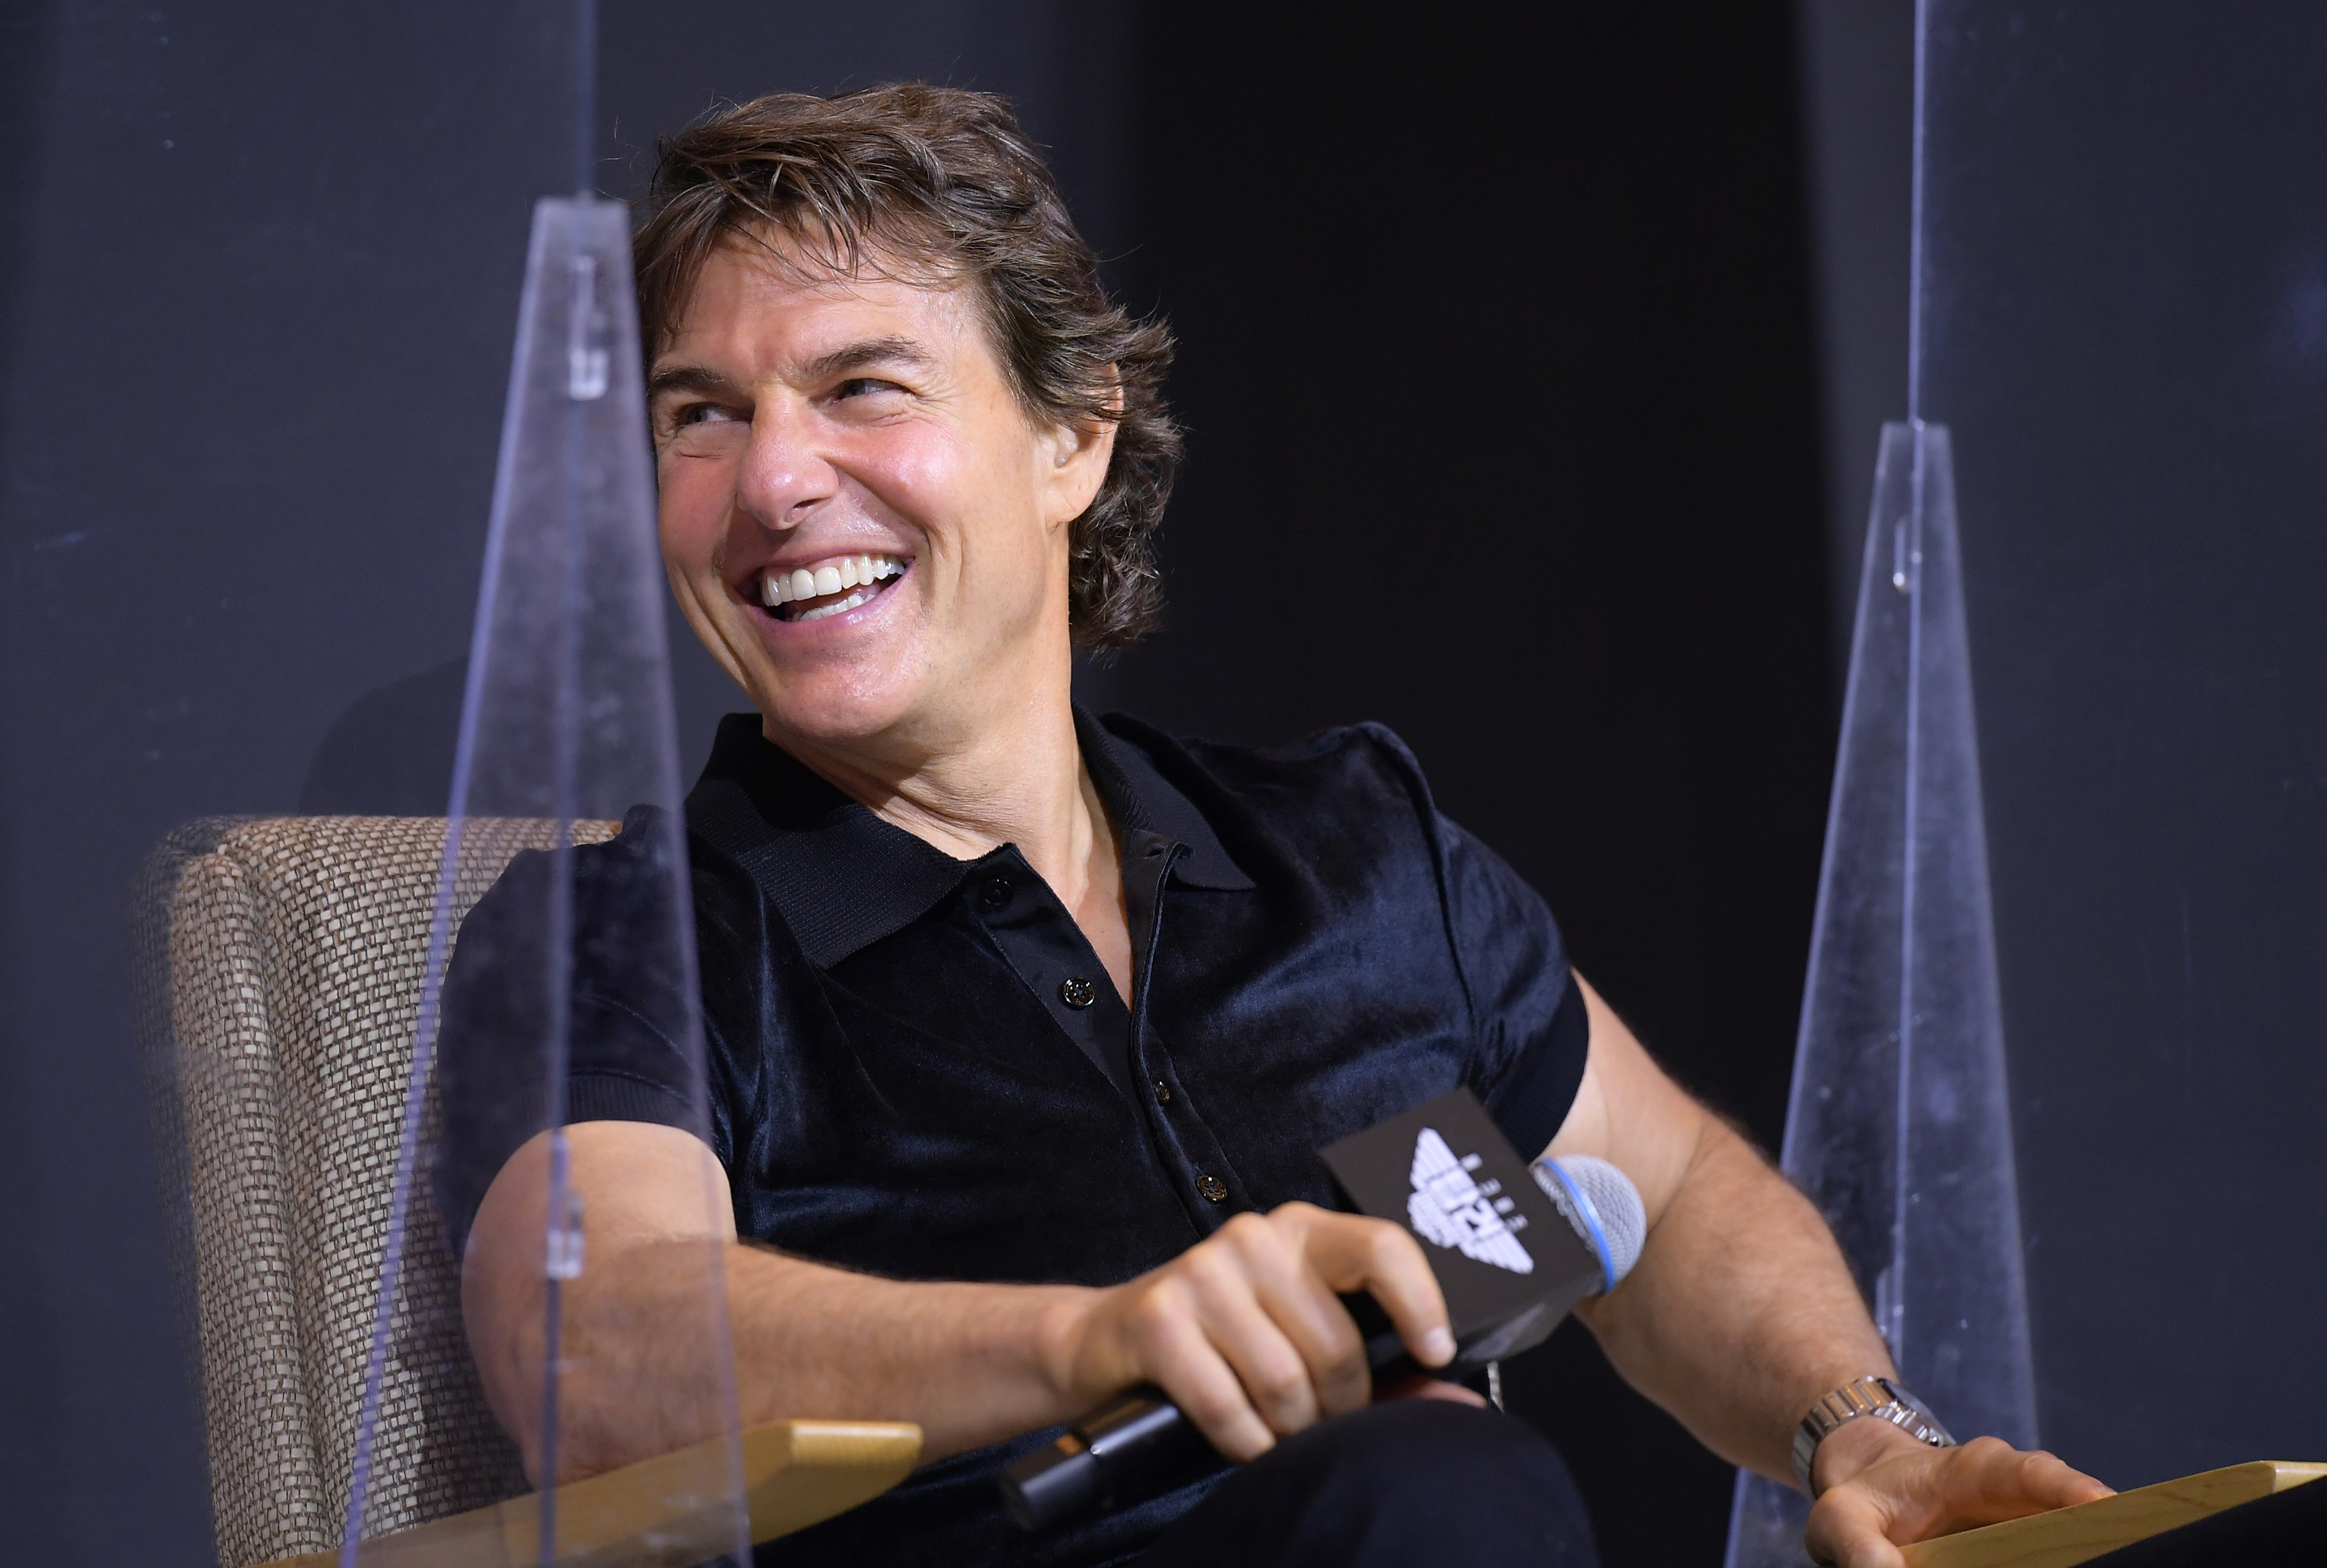 Tom Cruise, seated and laughing, holds a microphone while attending an event. He is wearing a short-sleeved, button-up shirt